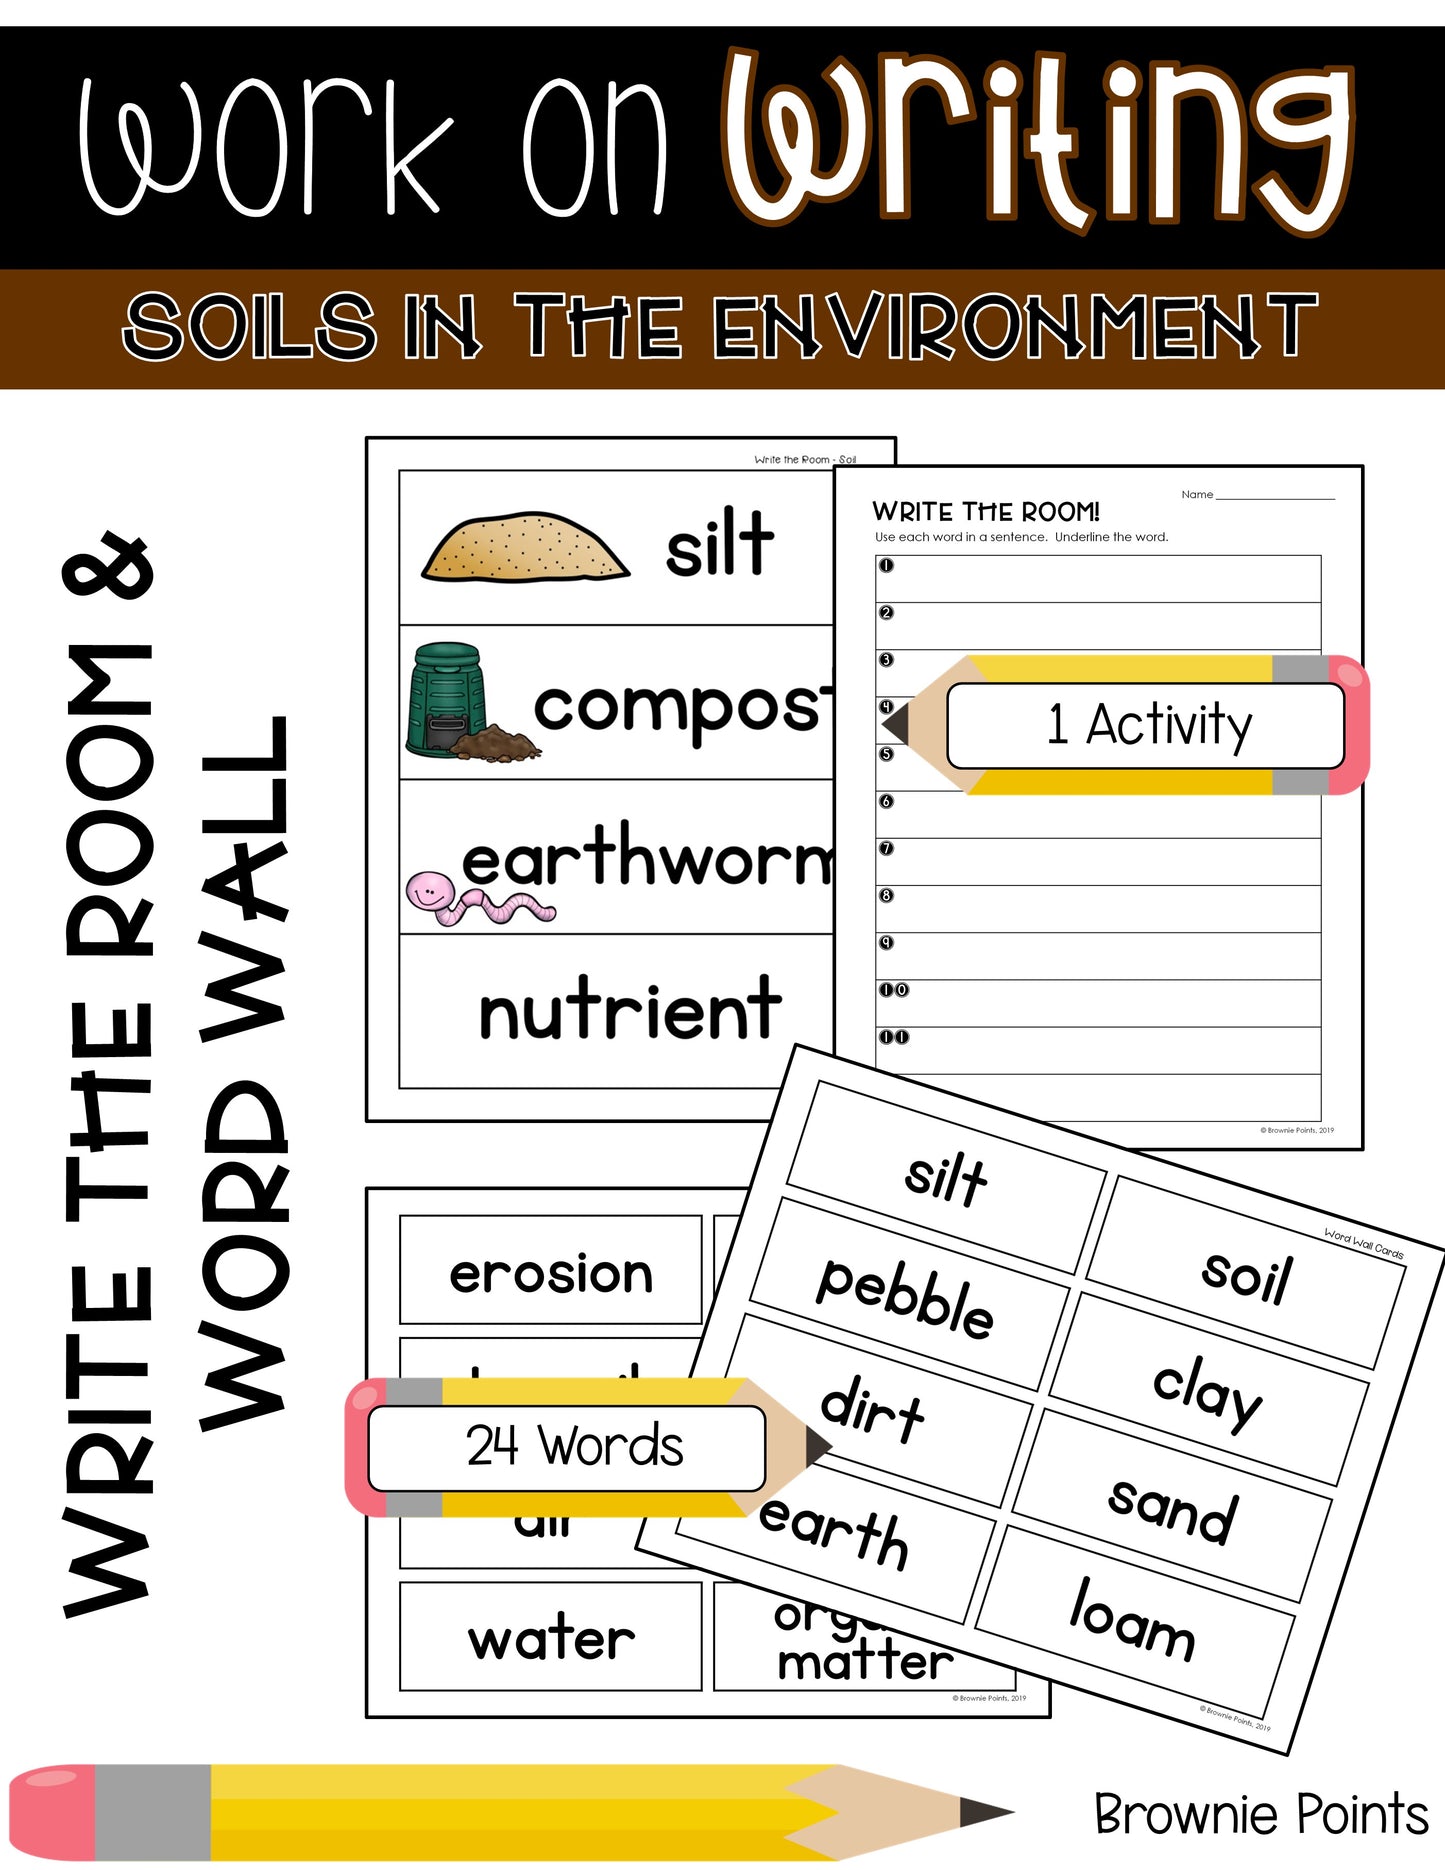 Work on Writing - Soils in the Environment